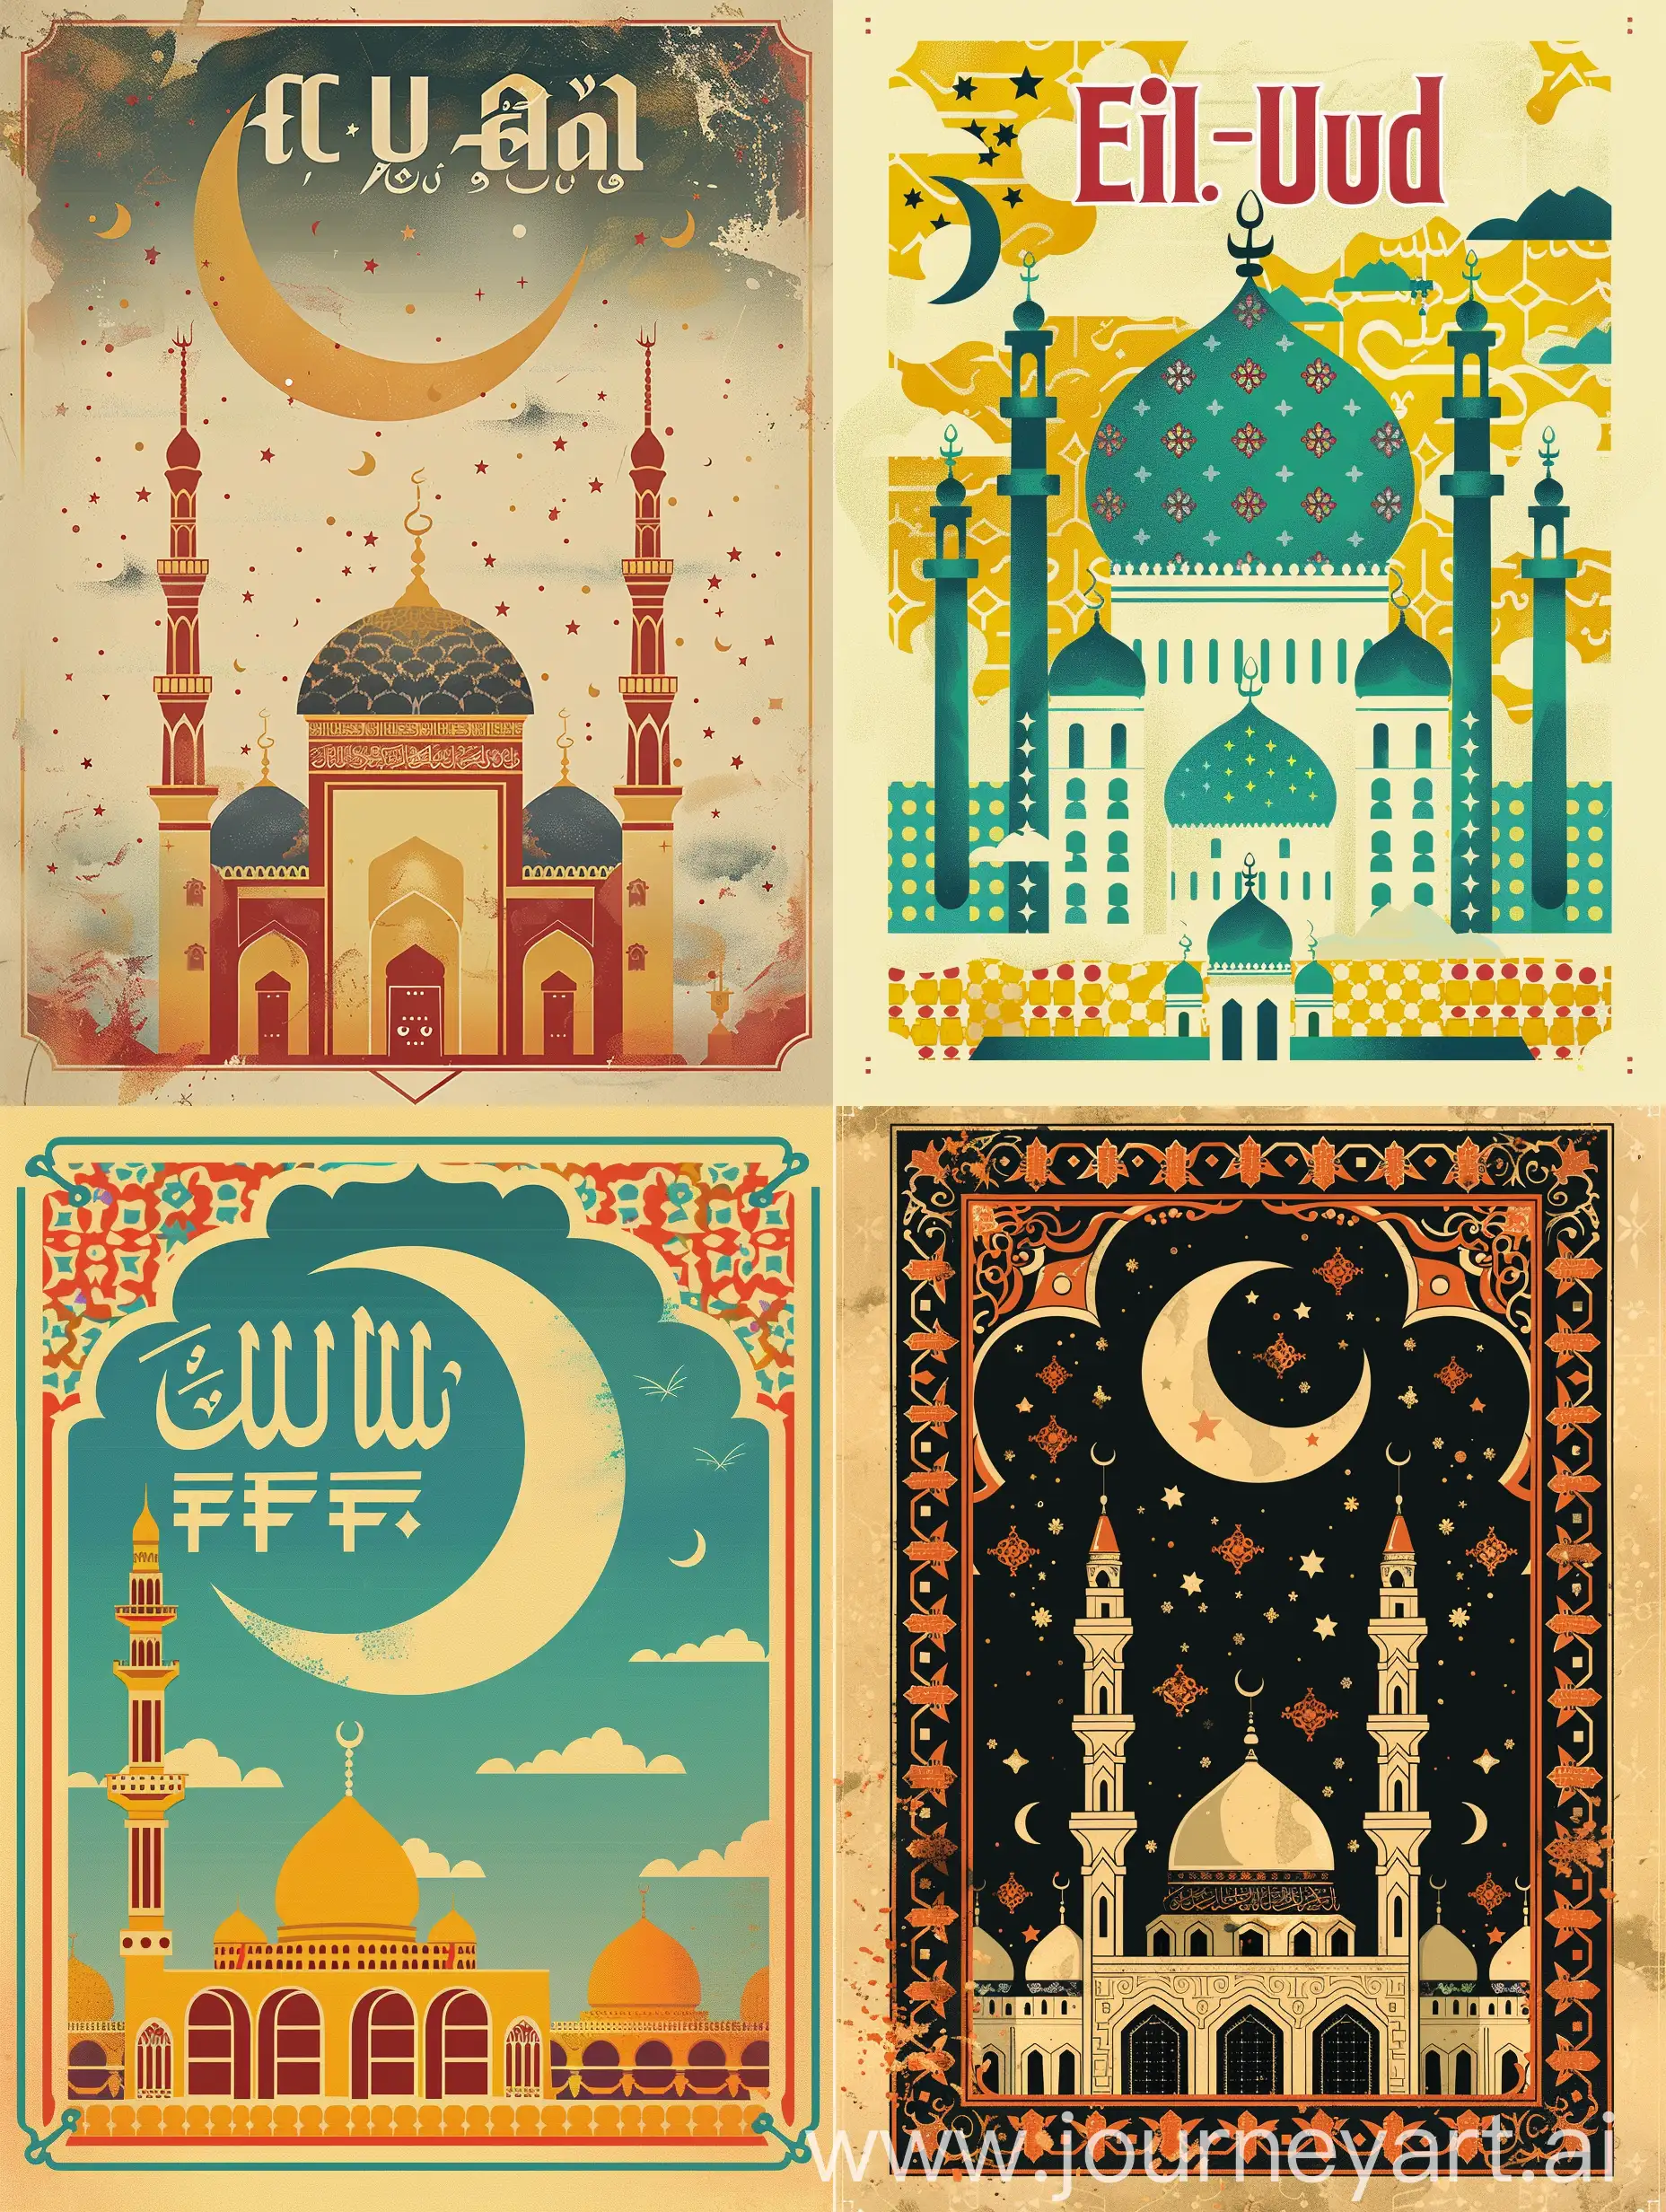 EidUlFitr-Celebration-Poster-with-Islamic-Patterns-Mosque-and-Crescent-Moon